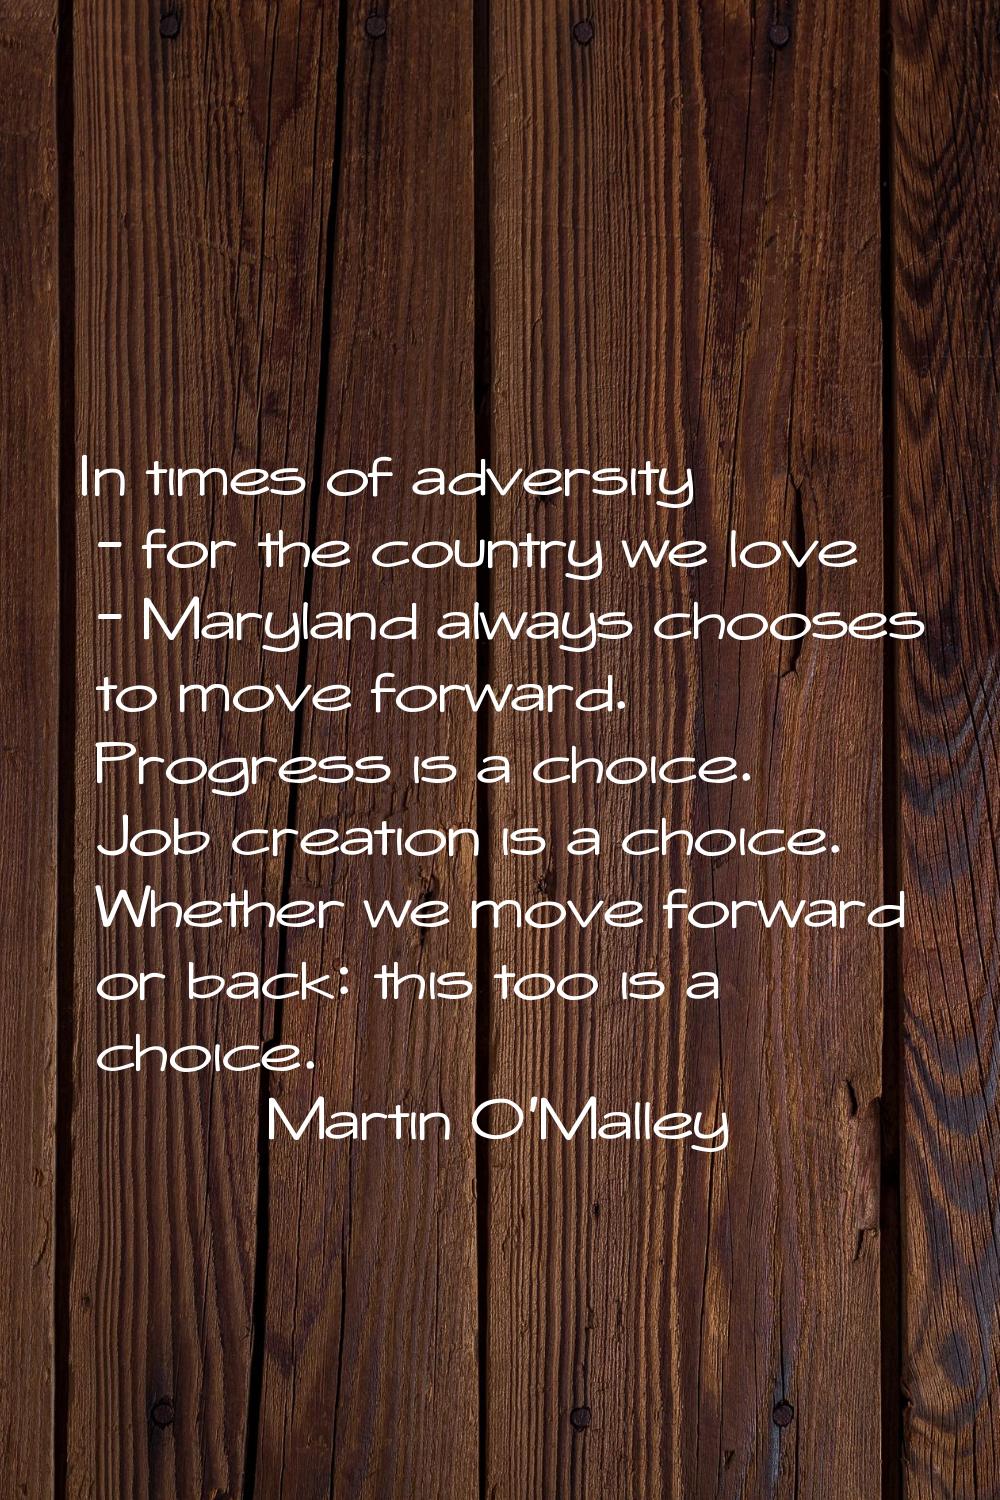 In times of adversity - for the country we love - Maryland always chooses to move forward. Progress